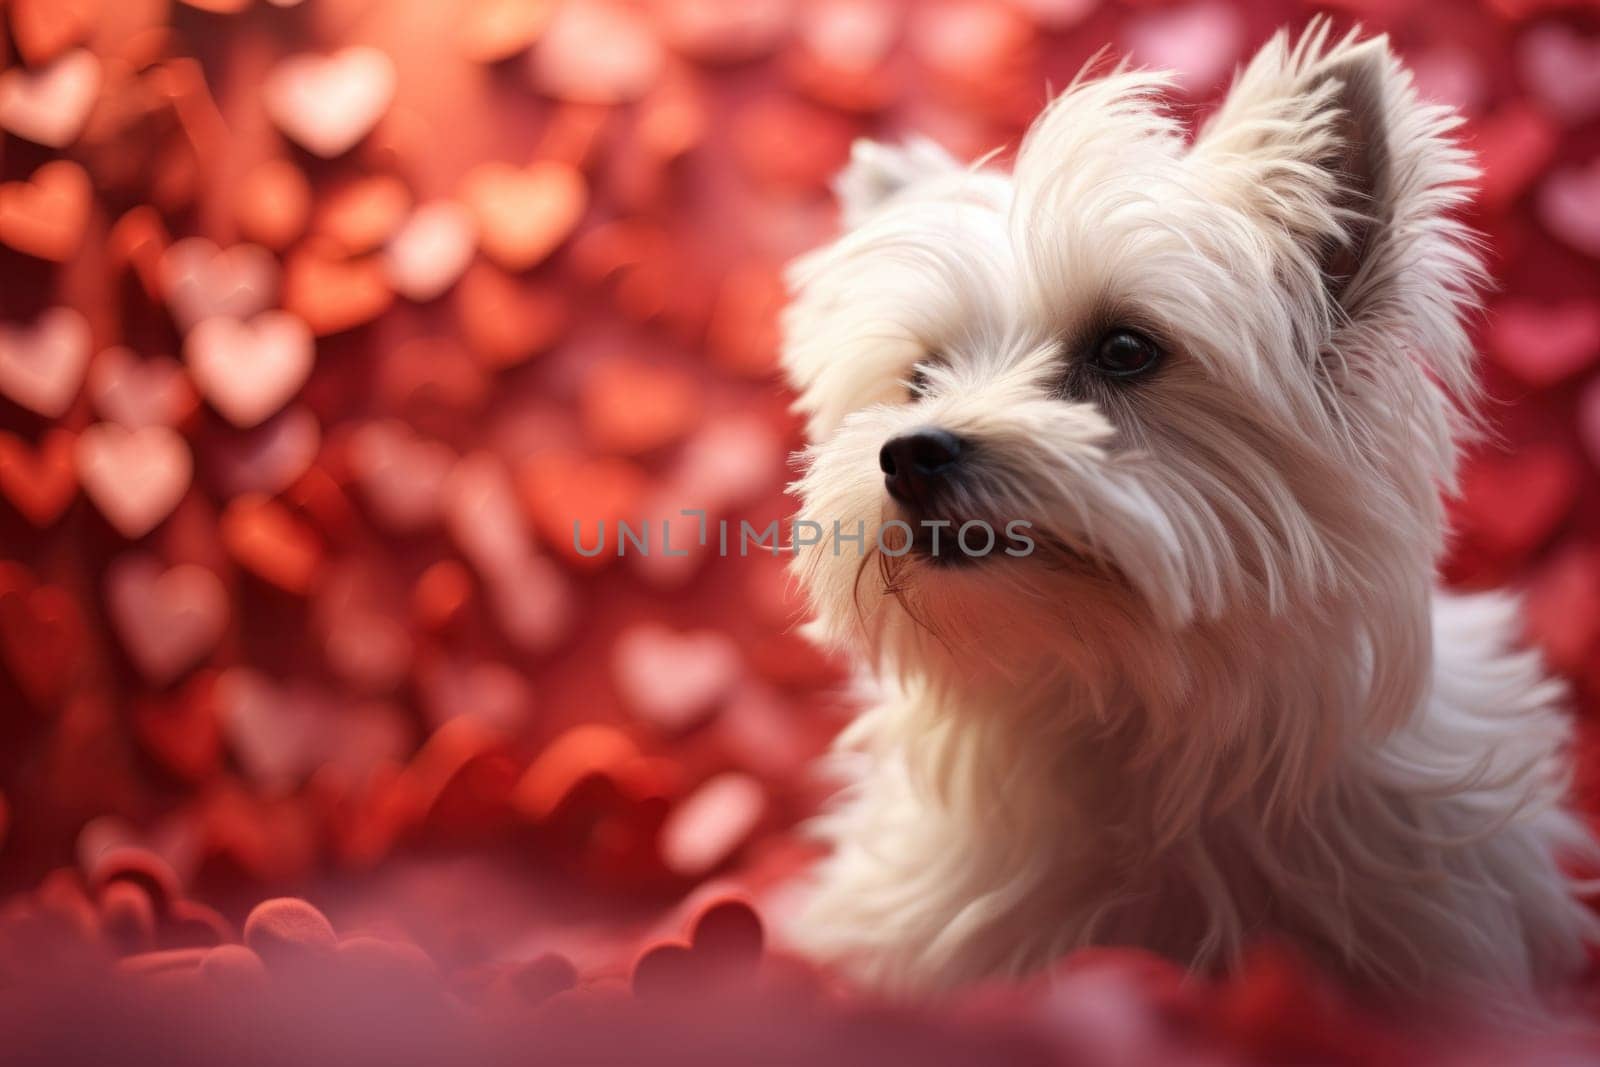 A small white dog sitting in front of a bunch of hearts, AI by starush